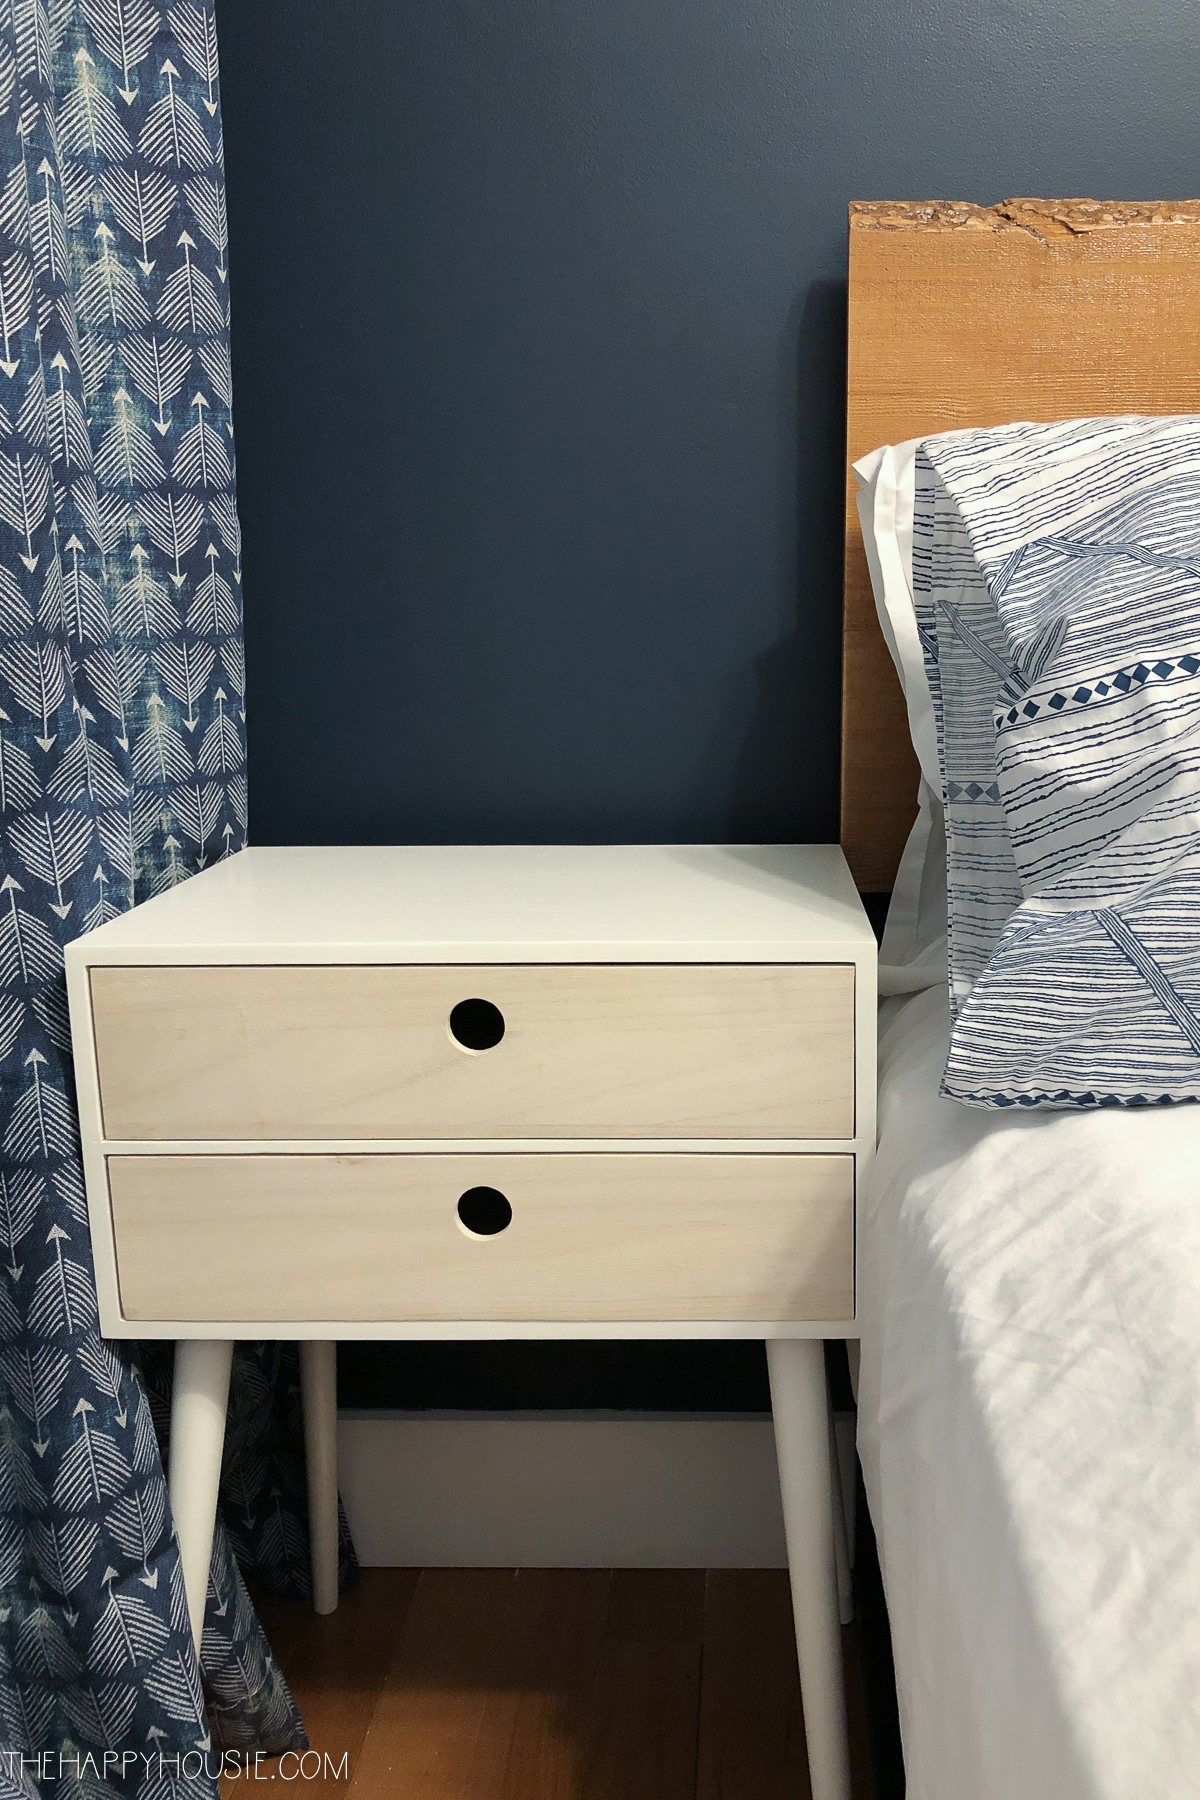 A small nightstand beside the bed.